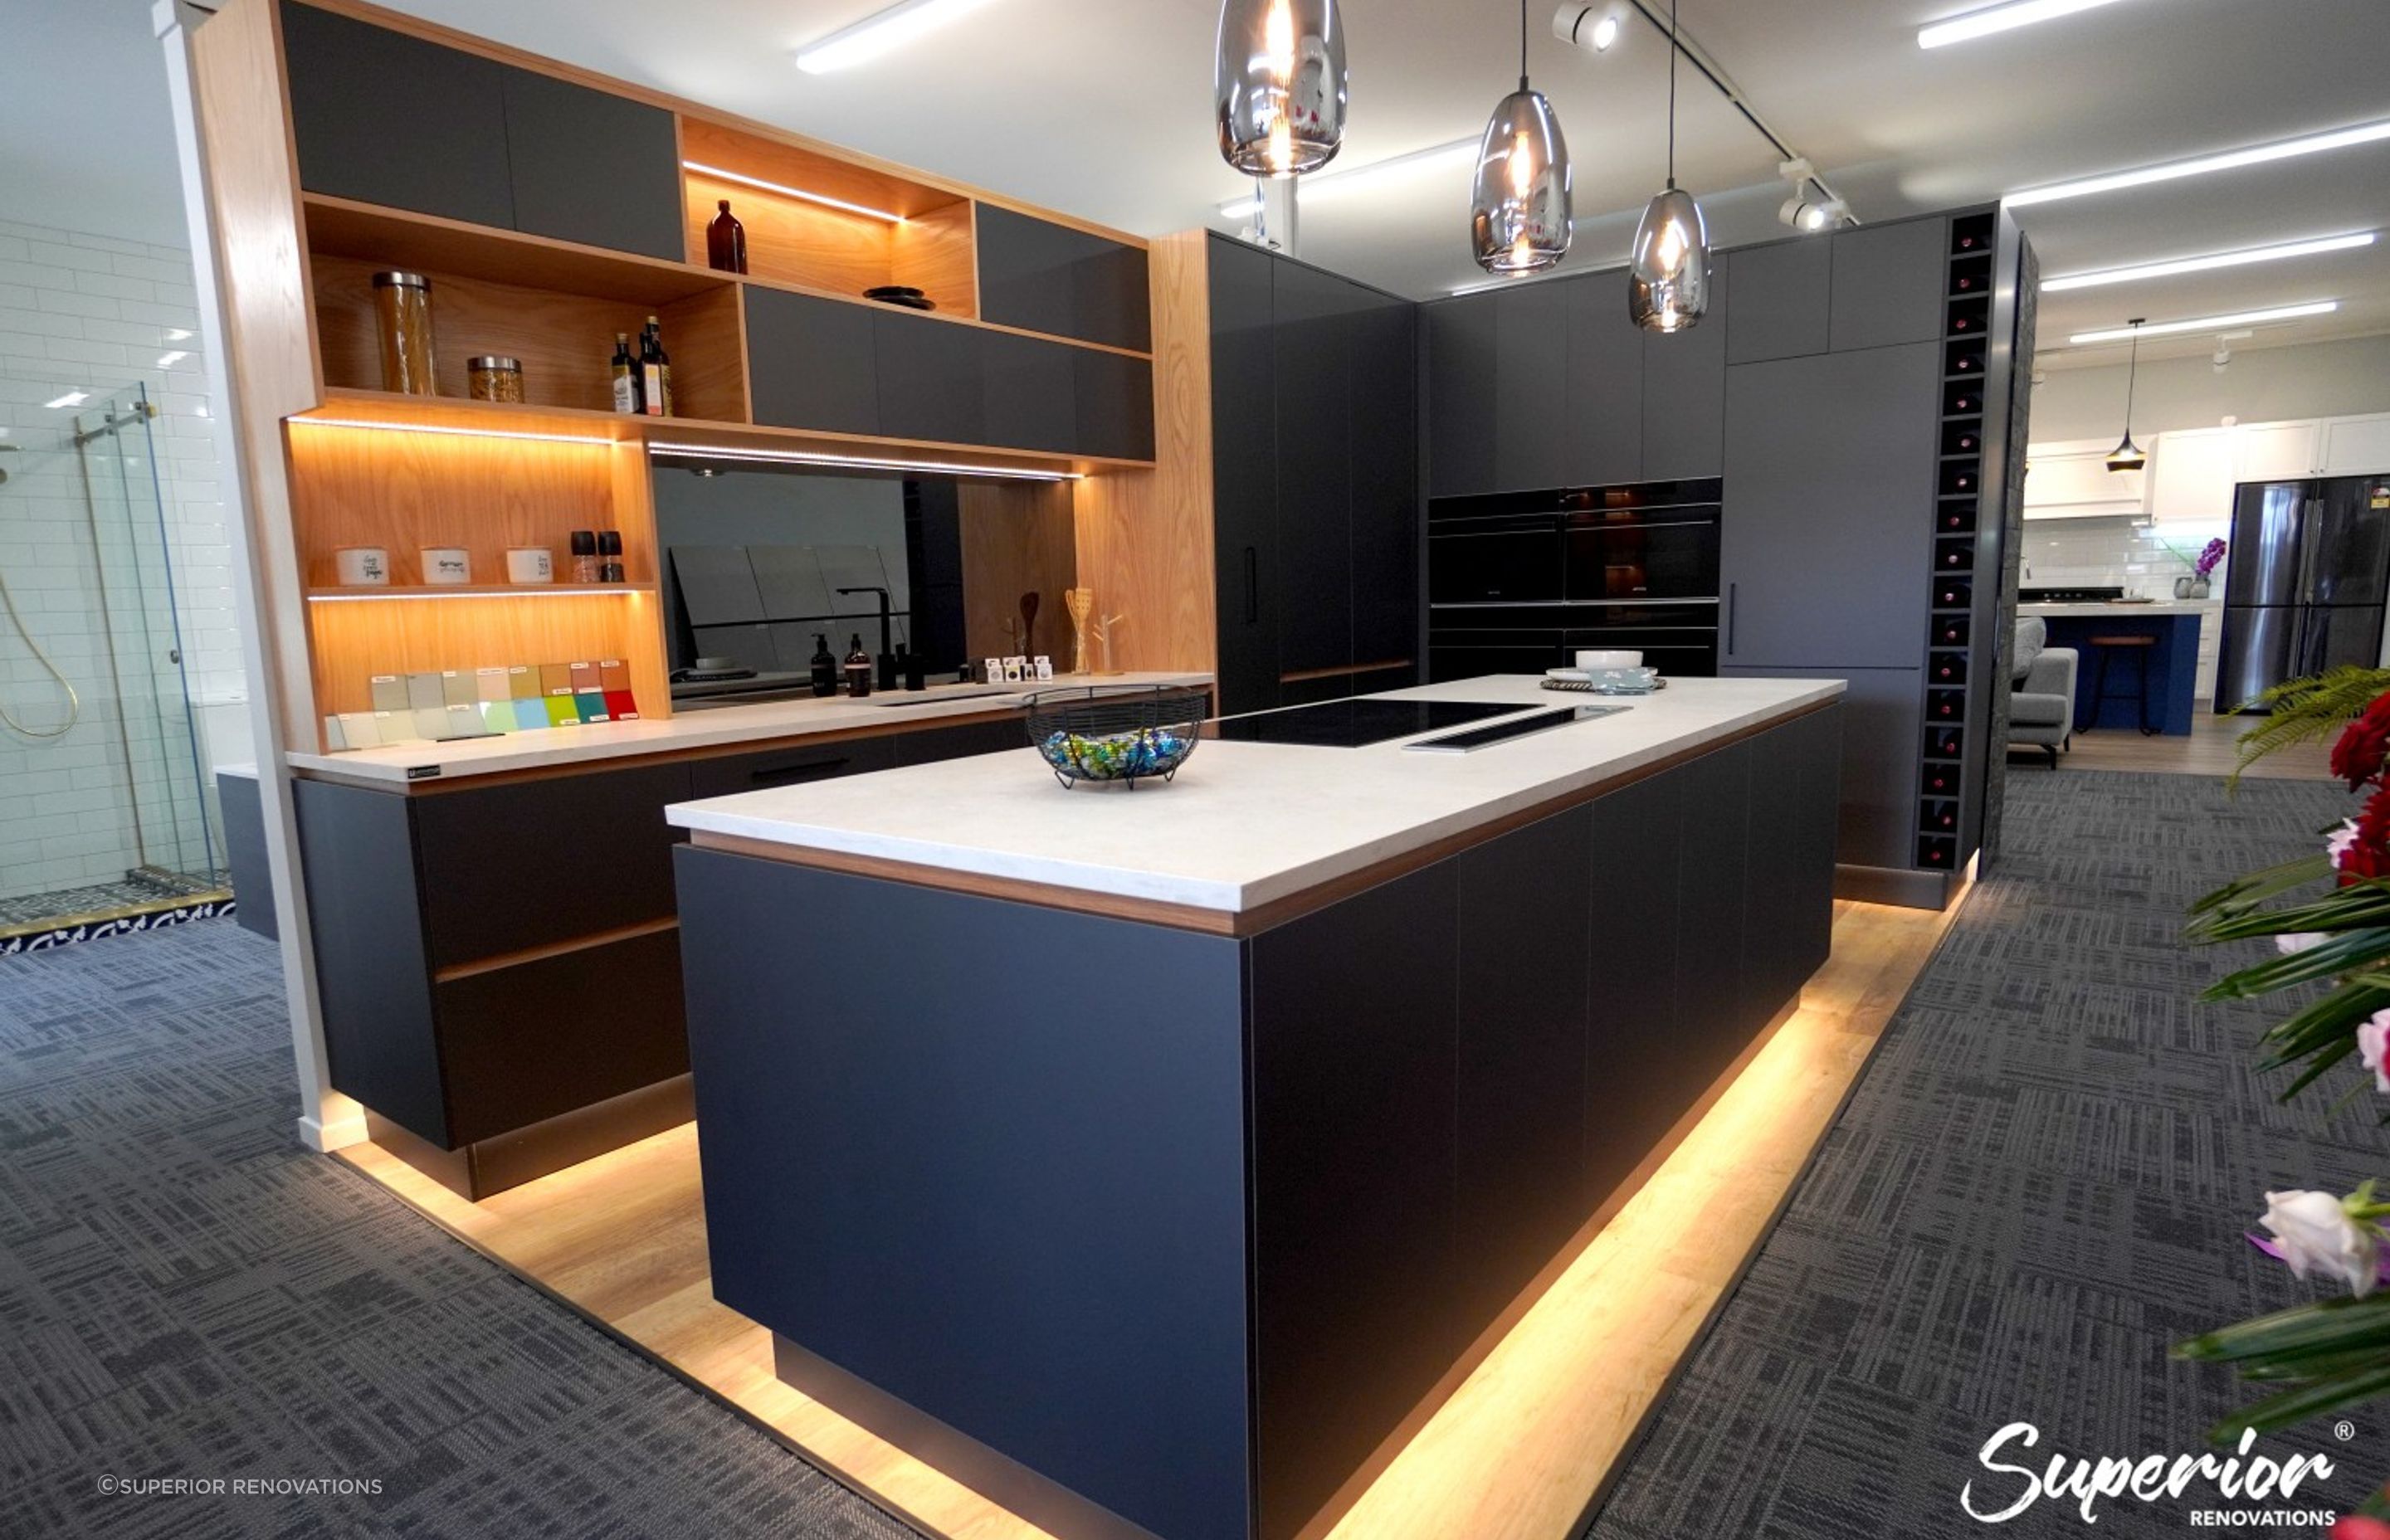 Our renovation showroom in Wairau Valley, Auckland. This is a great example of a modern and sleek kitchen which has storage on both sides of the kitchen island.